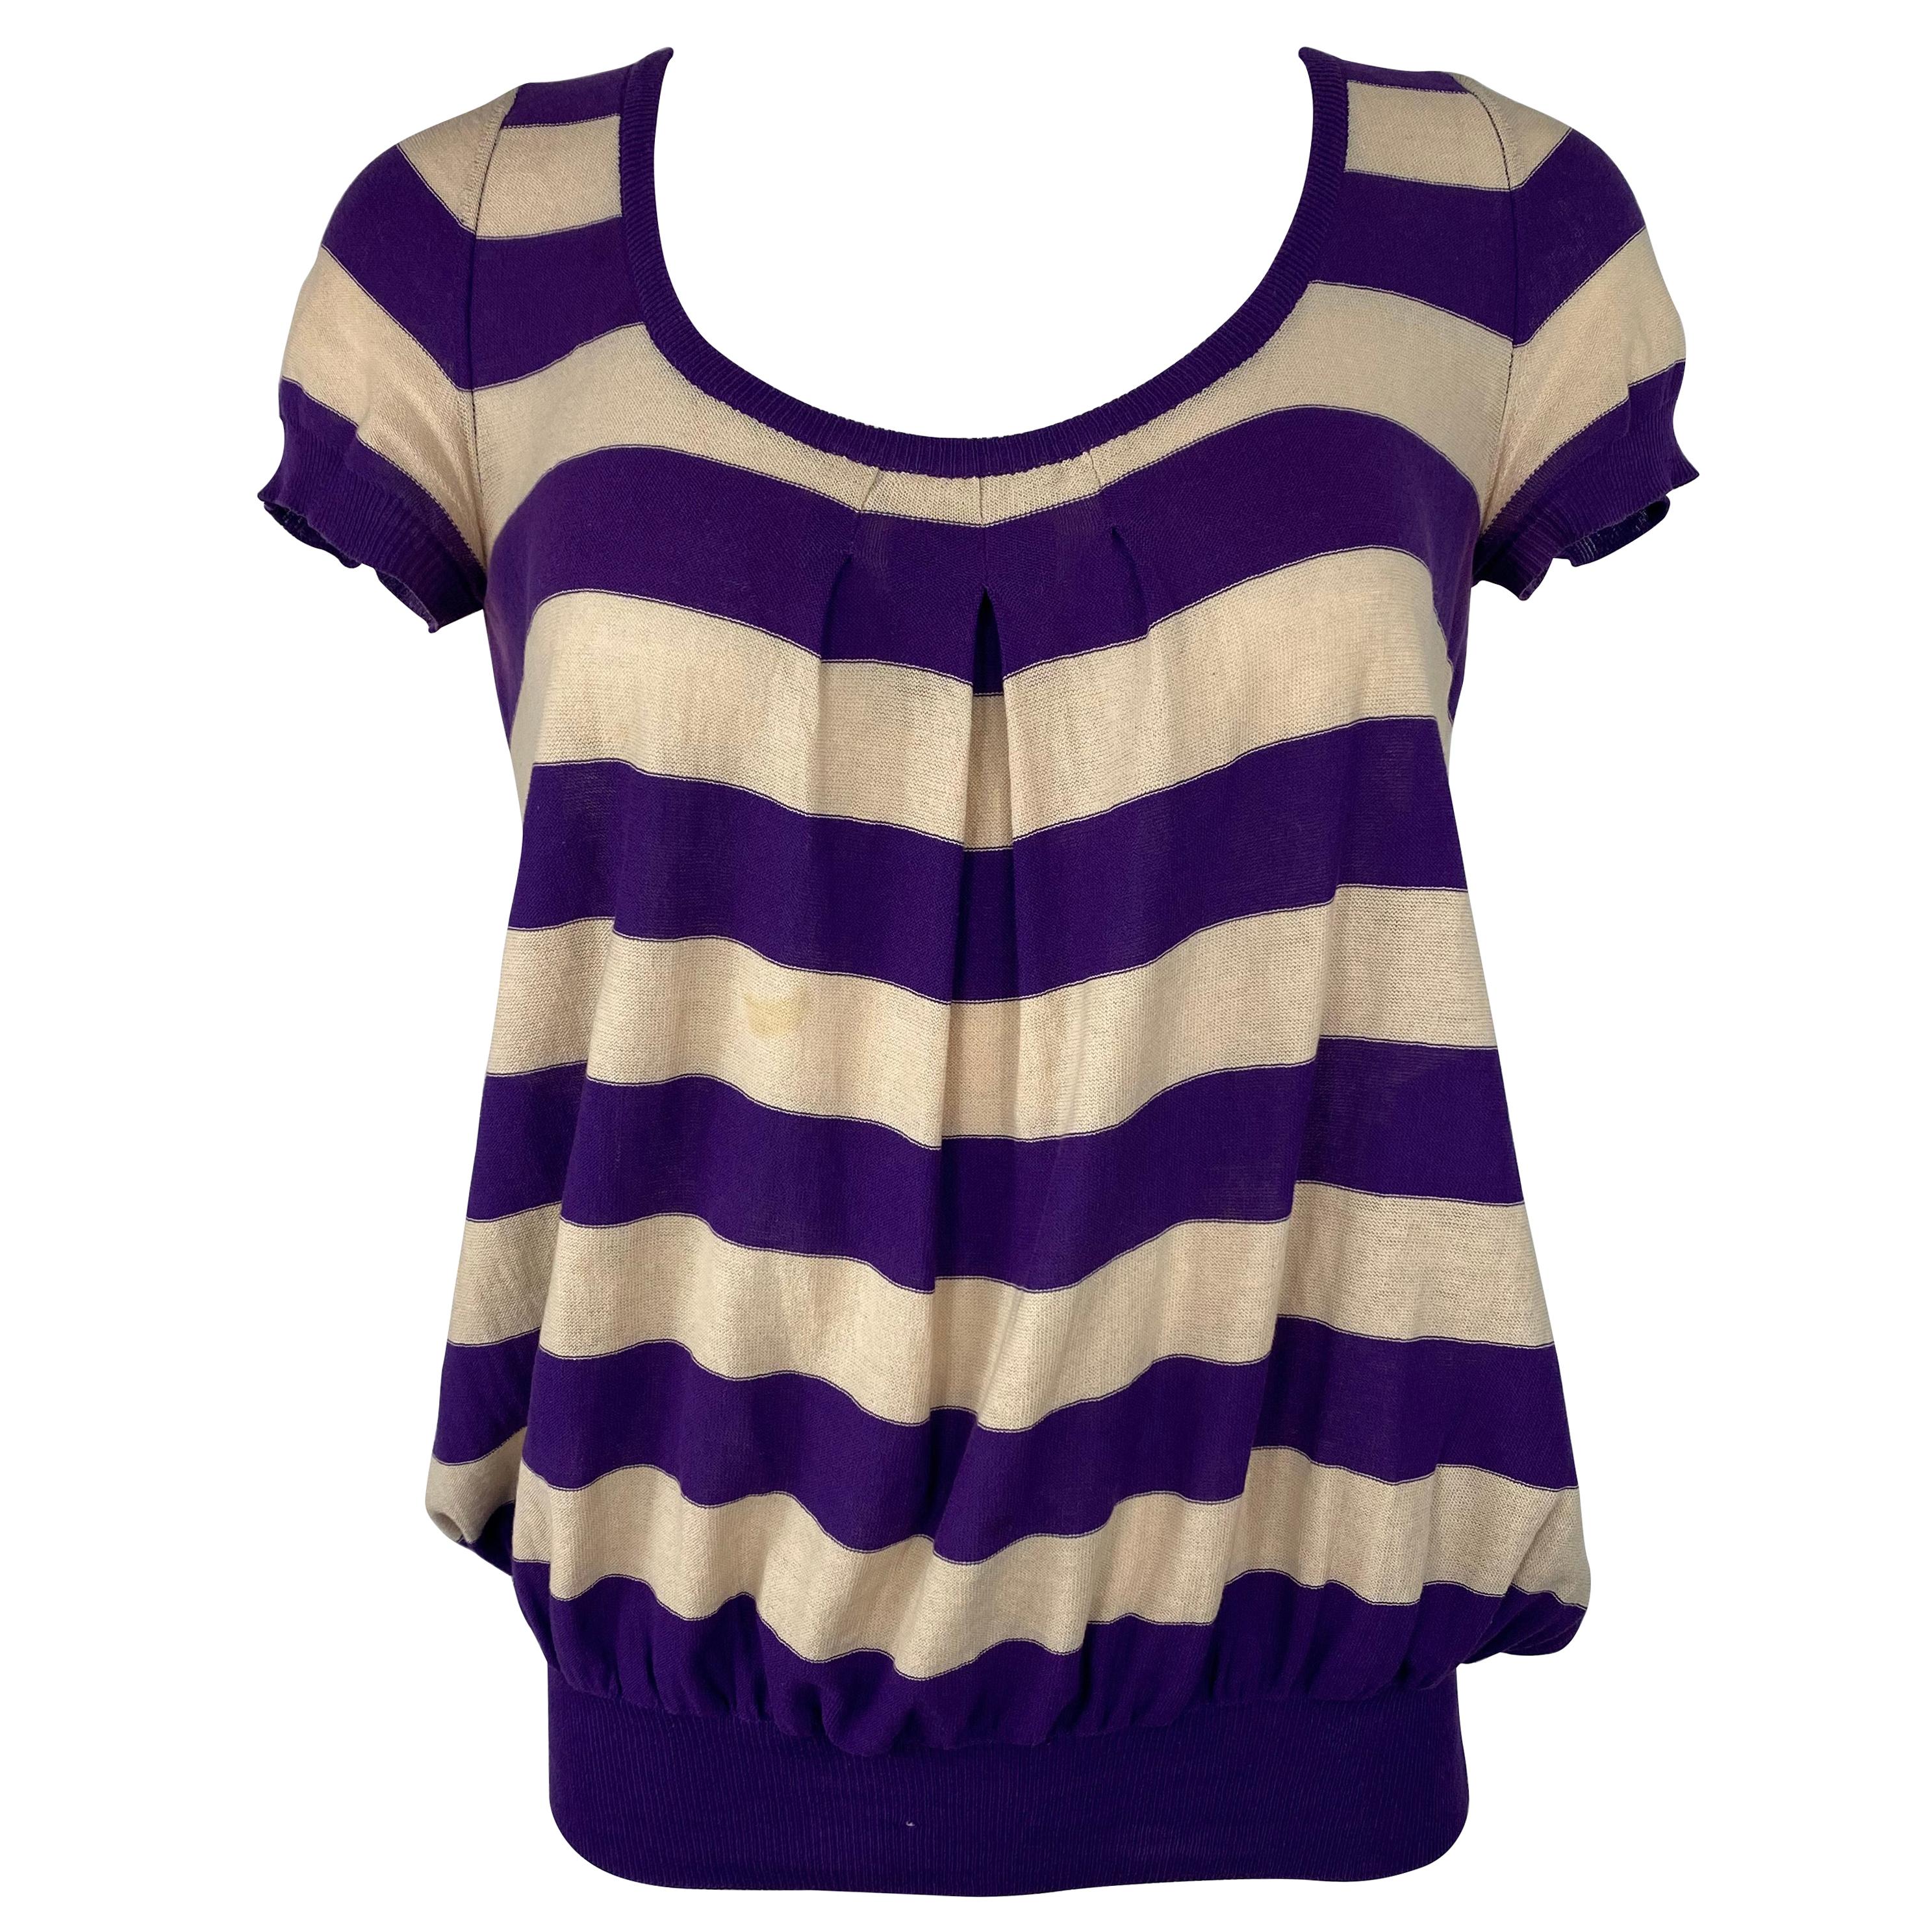 Vintage Sonia Rykiel Purple and Cream Striped Top, Size 38 For Sale